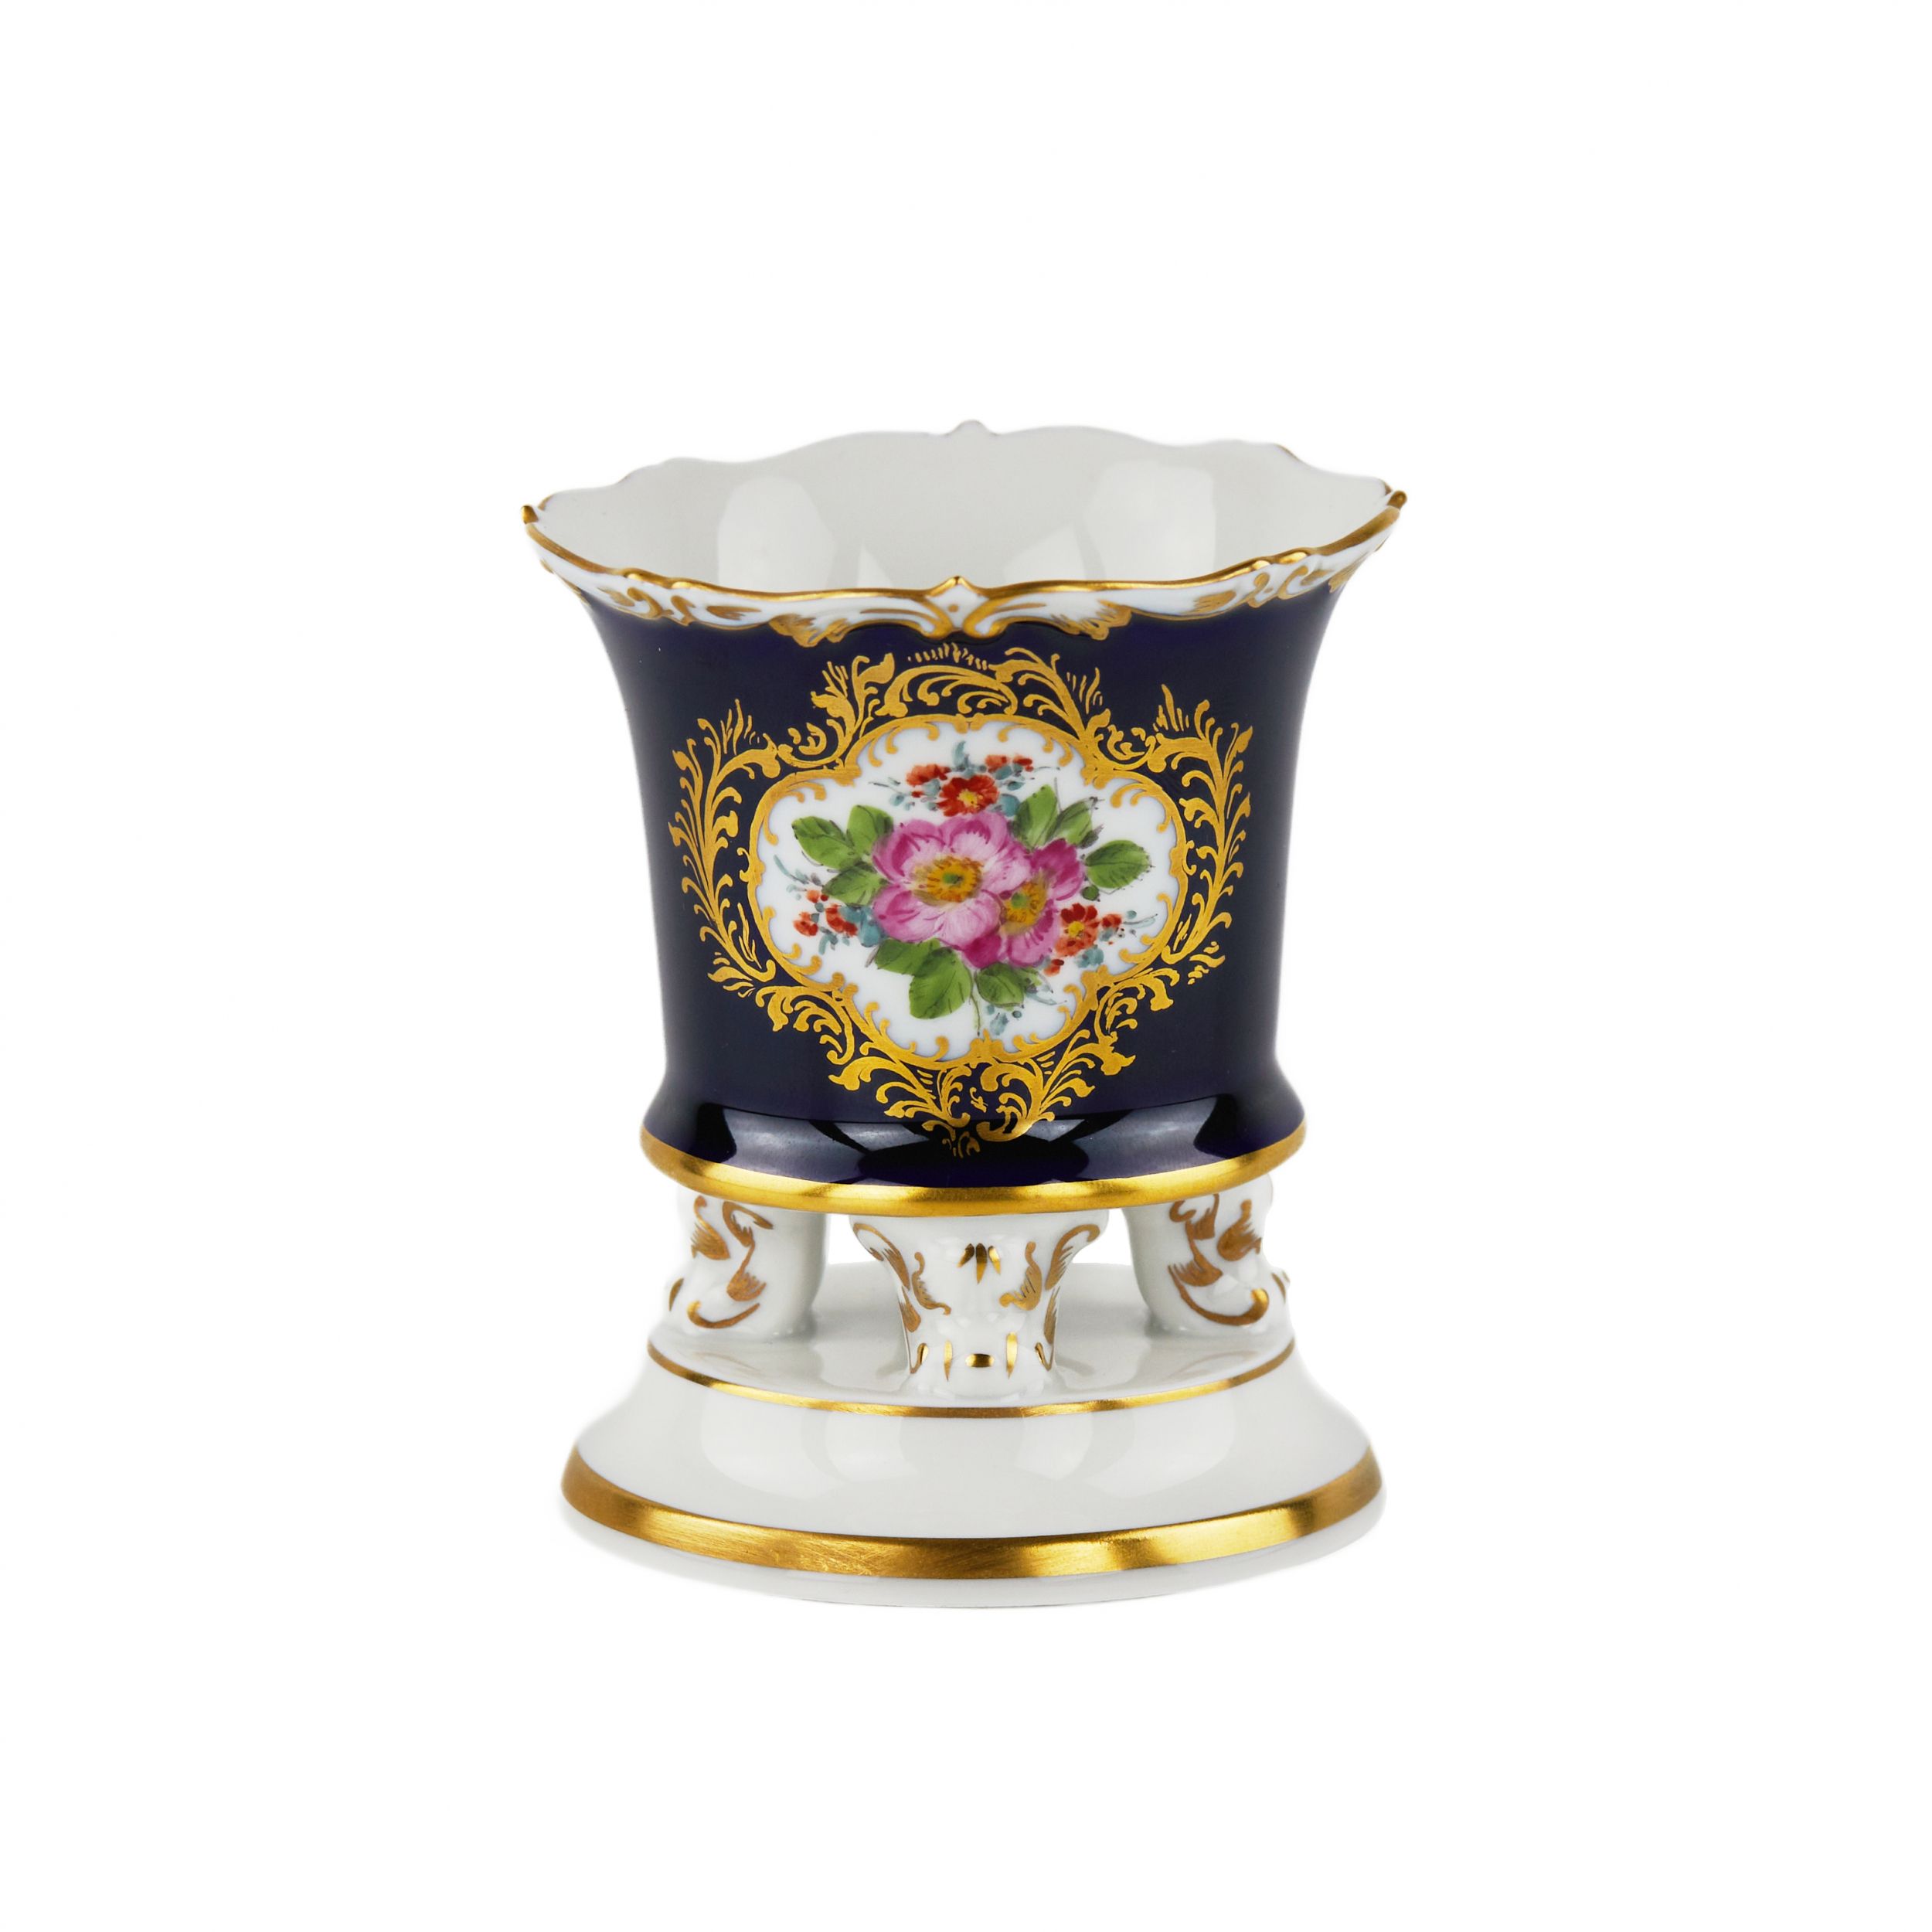 A-small-vase-on-four-figured-legs-resting-on-a-round-pedestal-Meissen-manufactory-